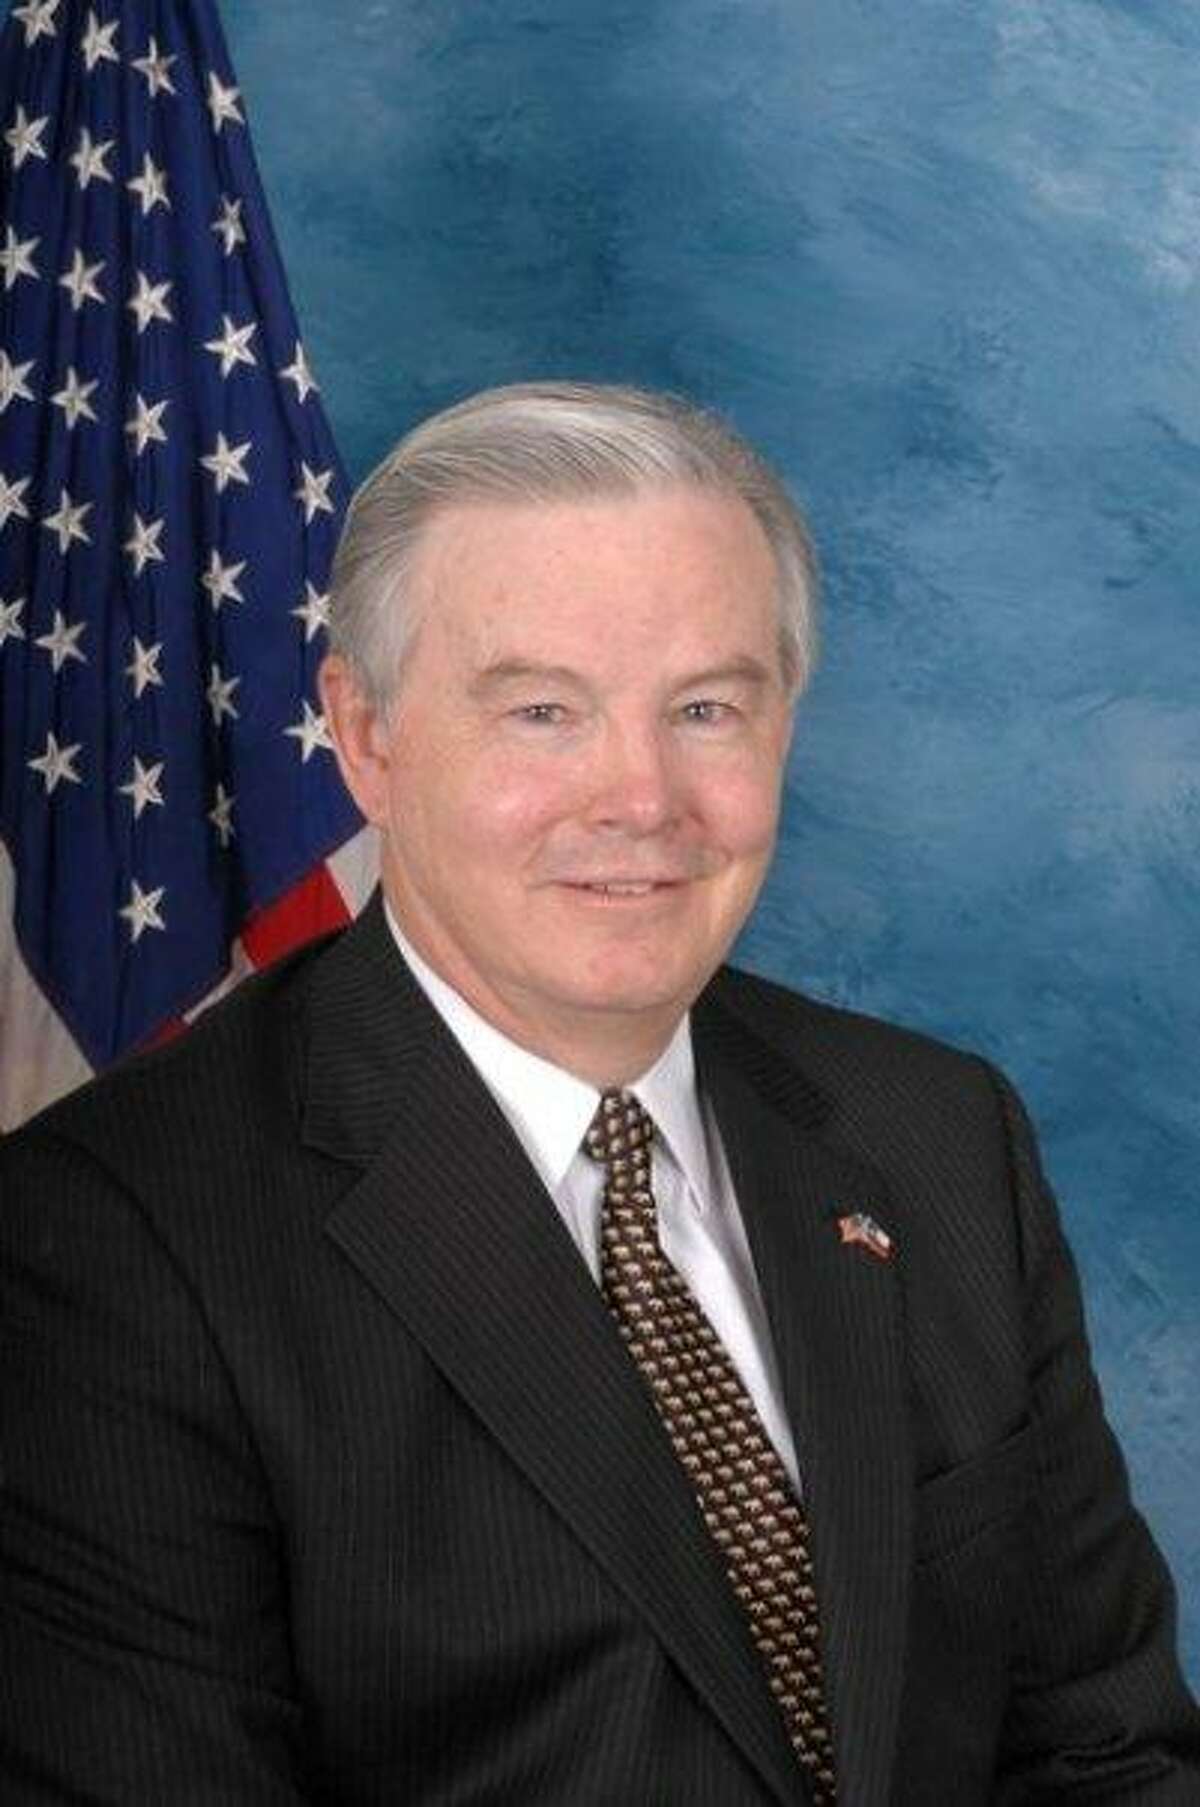 With disgraced Congressman Joe Barton in full damage-control mode over the revelation of a nude “sexting” photo on the internet, some grass-roots Republicans in the Dallas metroplex are calling on him to resign.